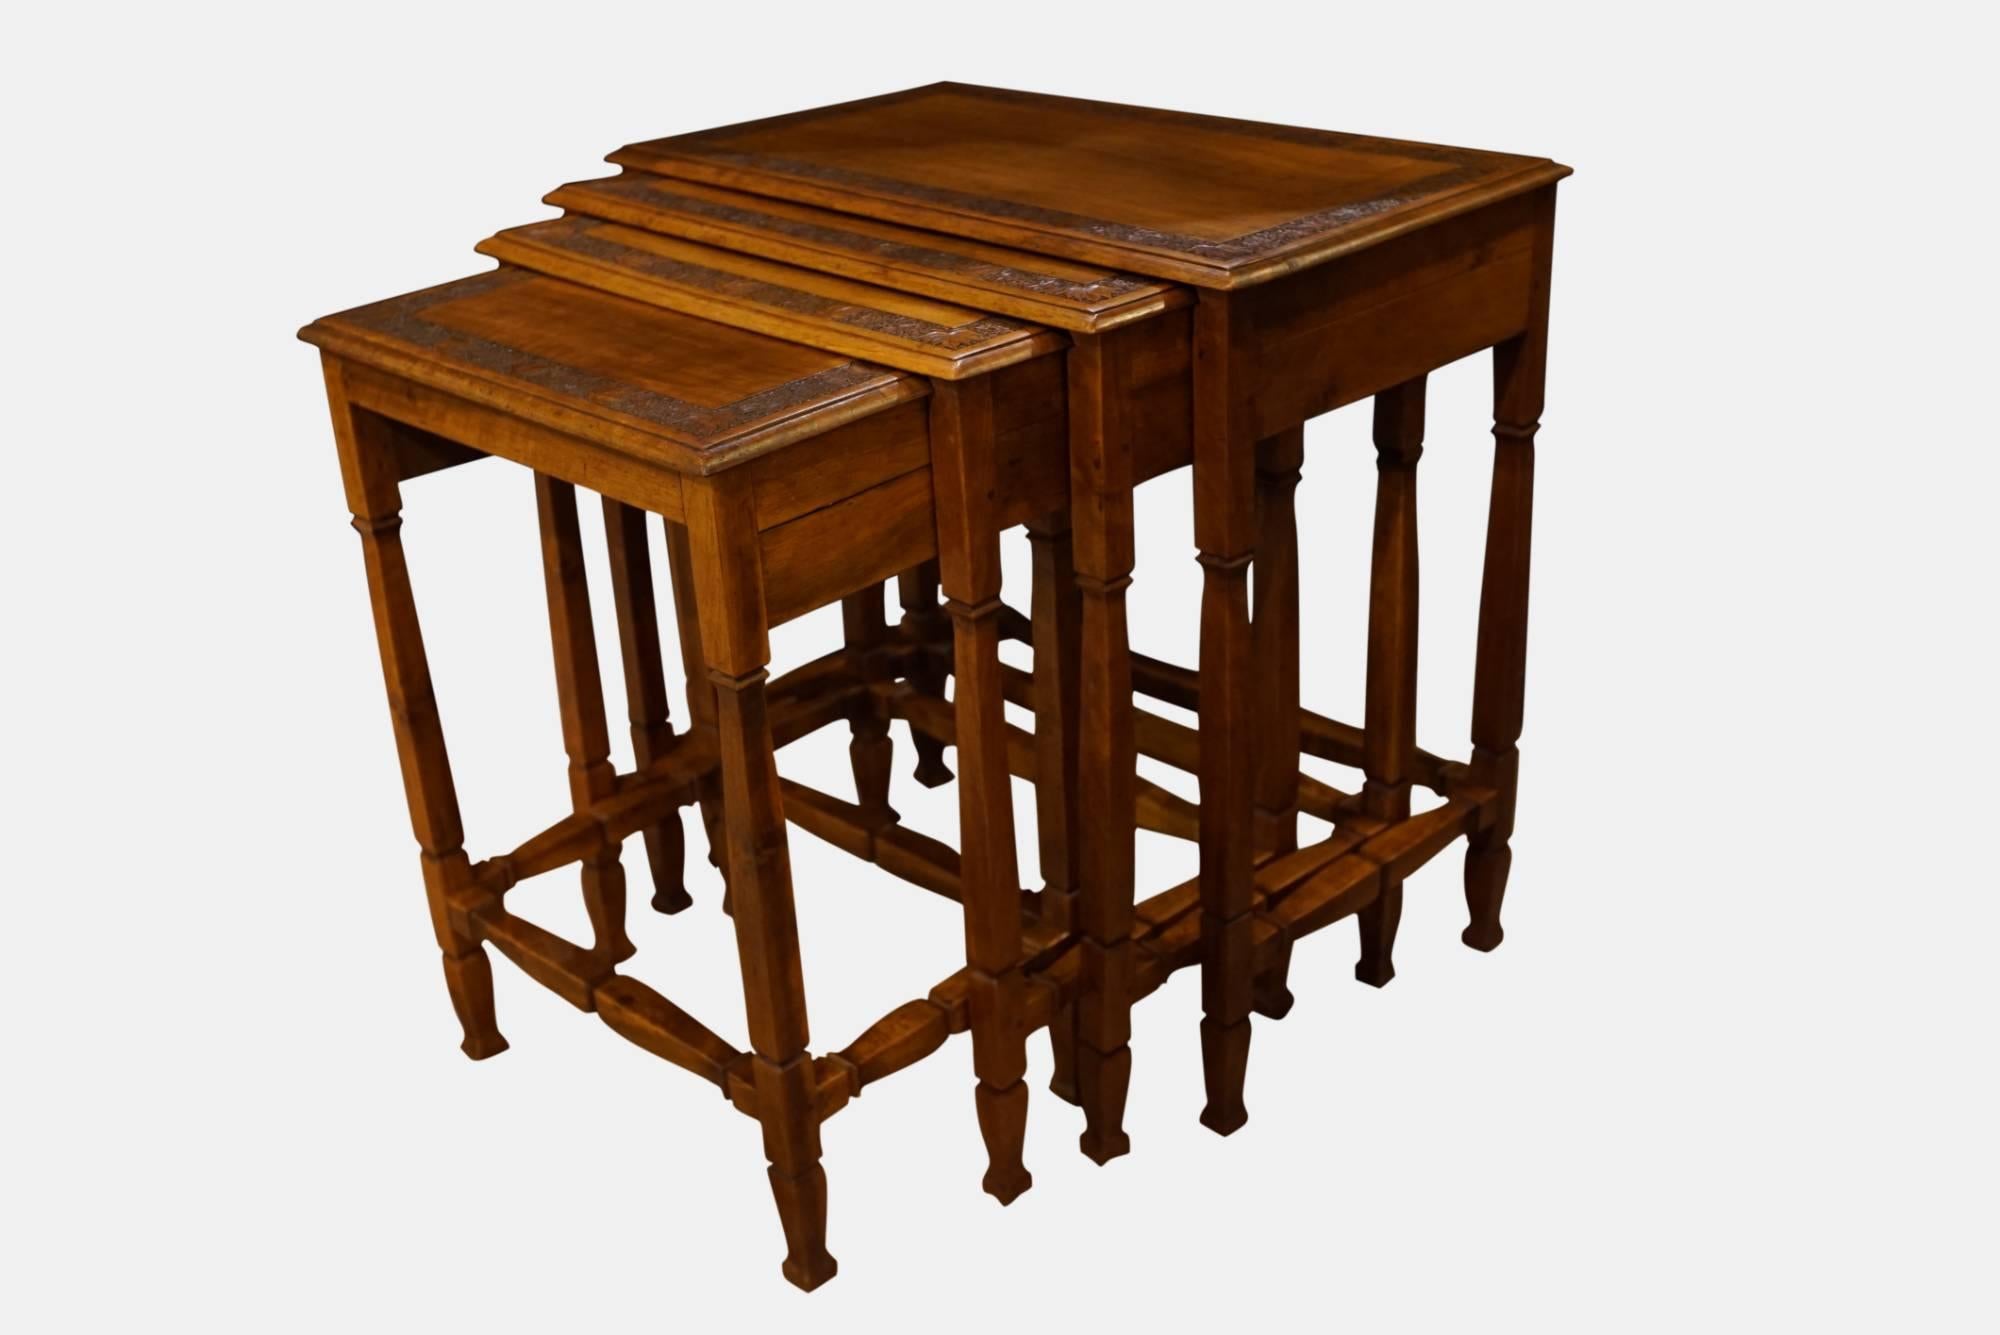 Quartetto nest of tables

Walnut, carved with running leaf pattern raised on square baluster legs

Continental, circa 1900.
 